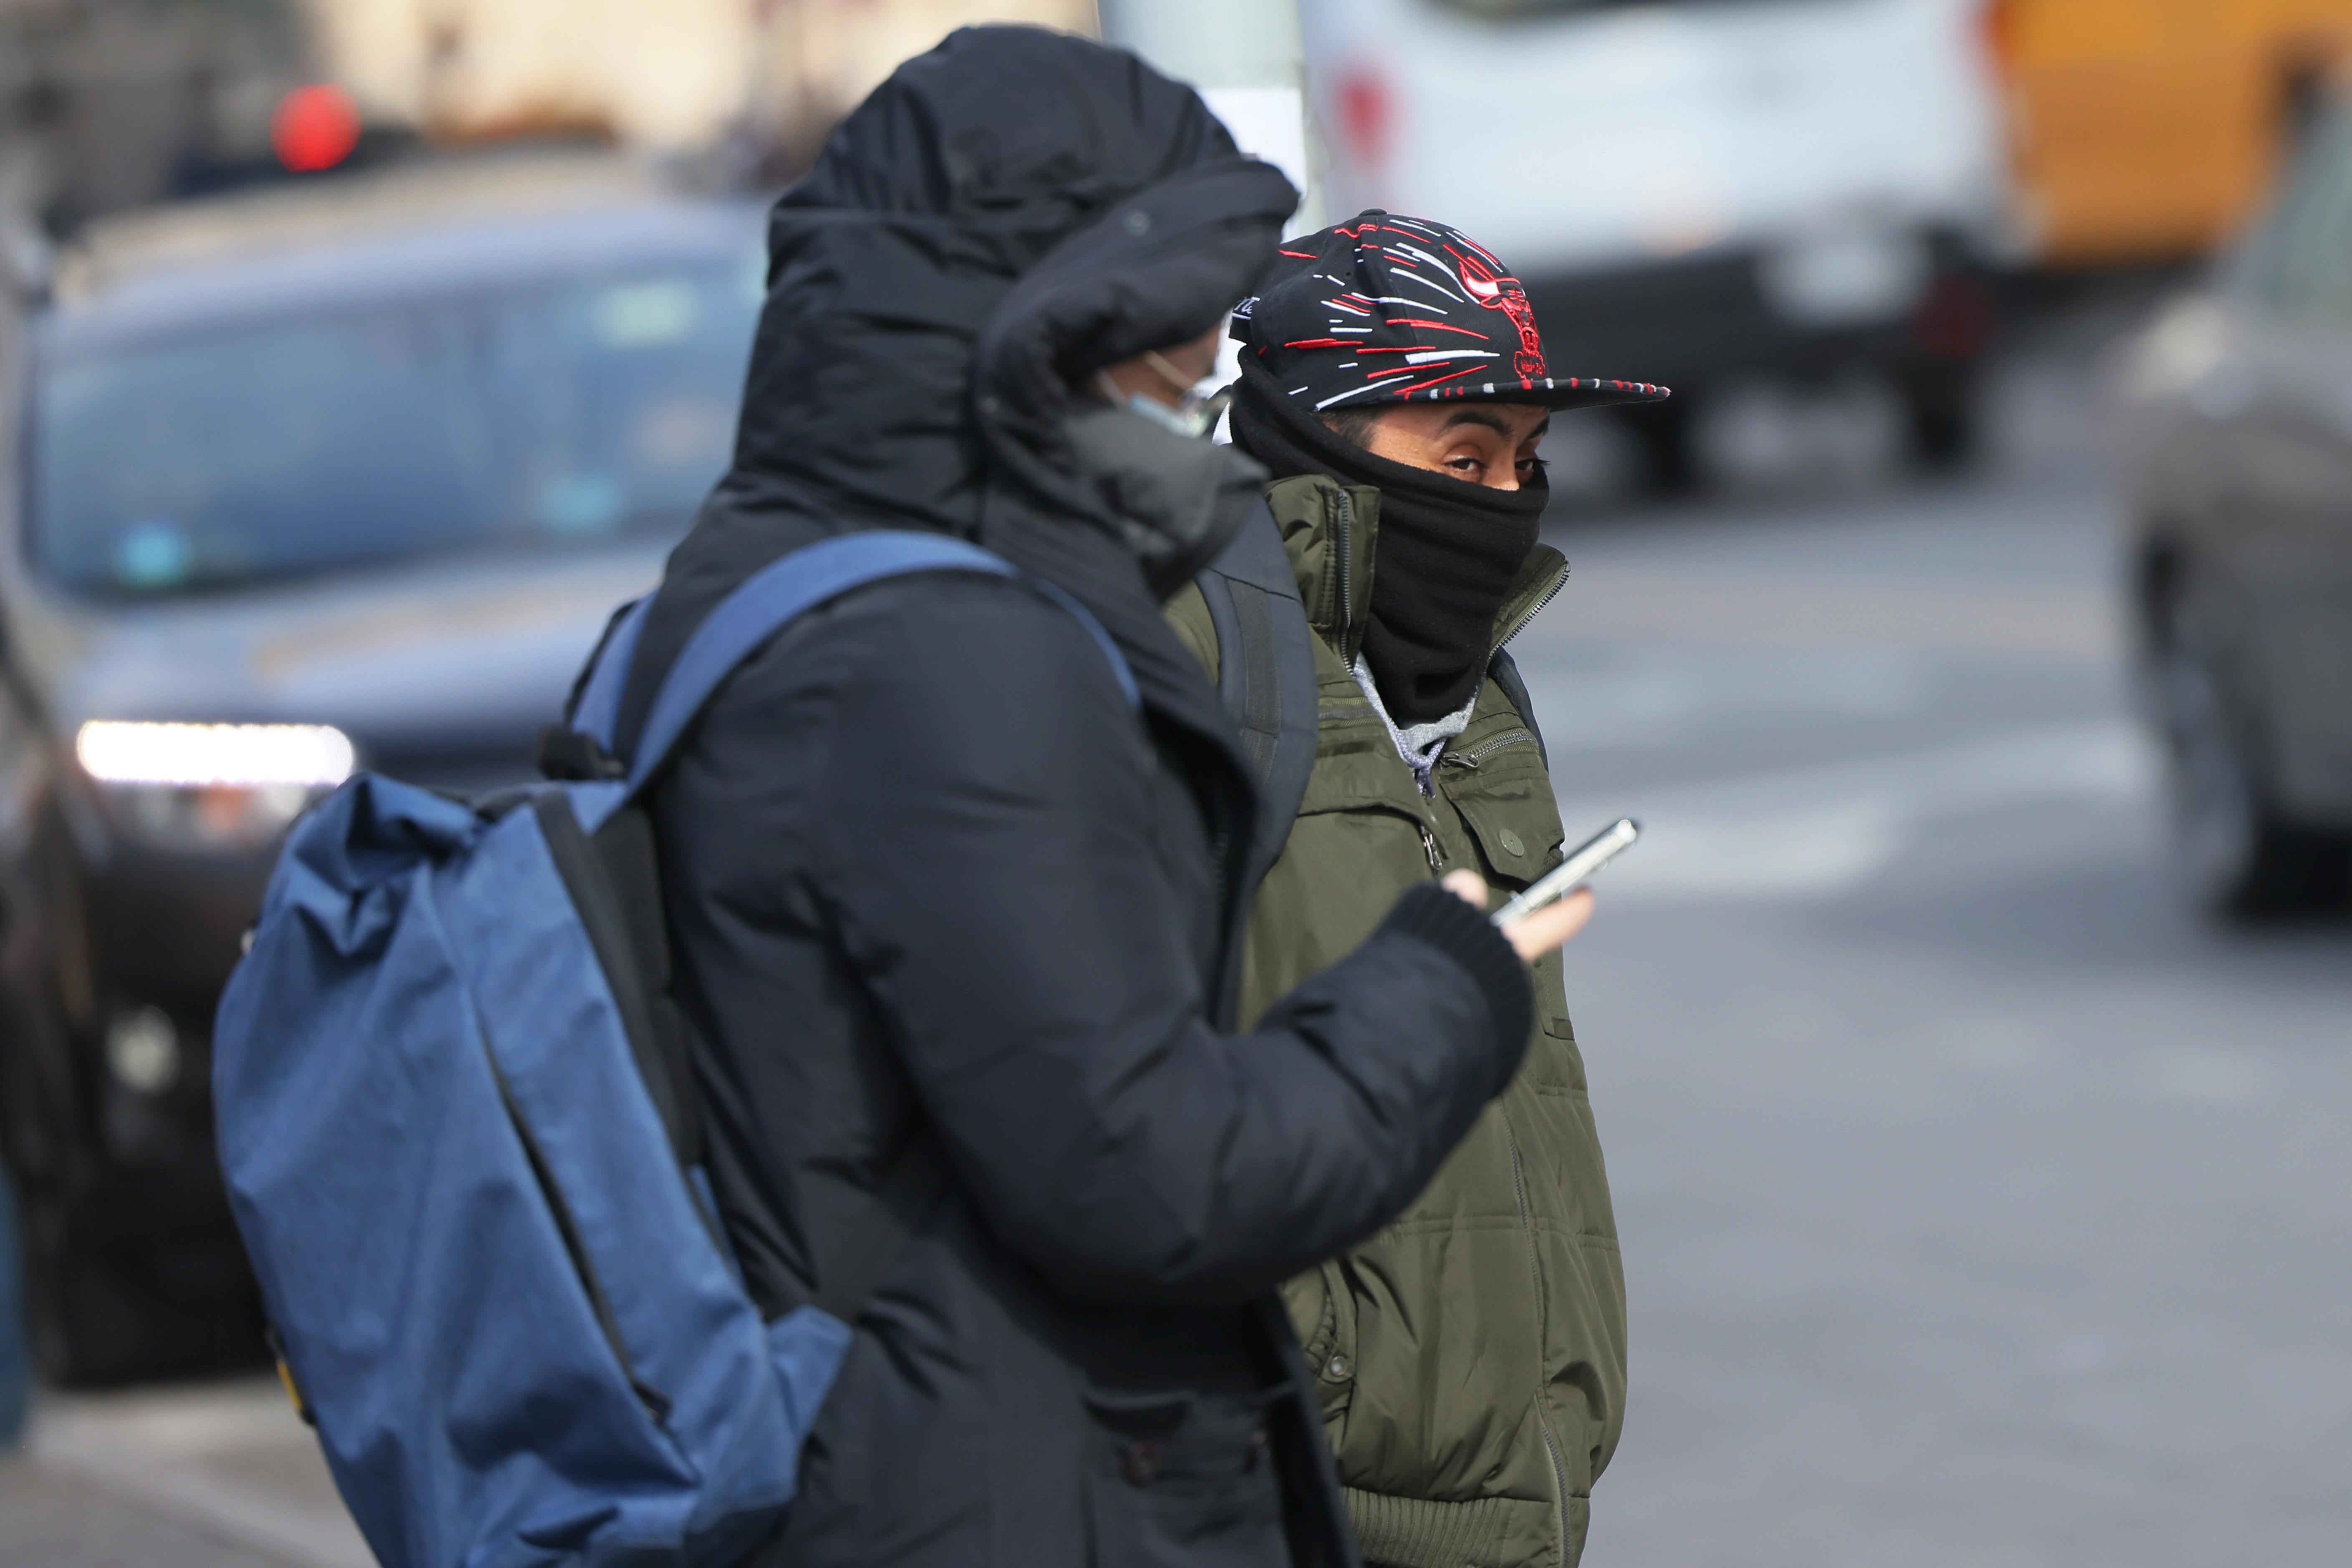 Two people stand outside in New York City bundled up in coats.